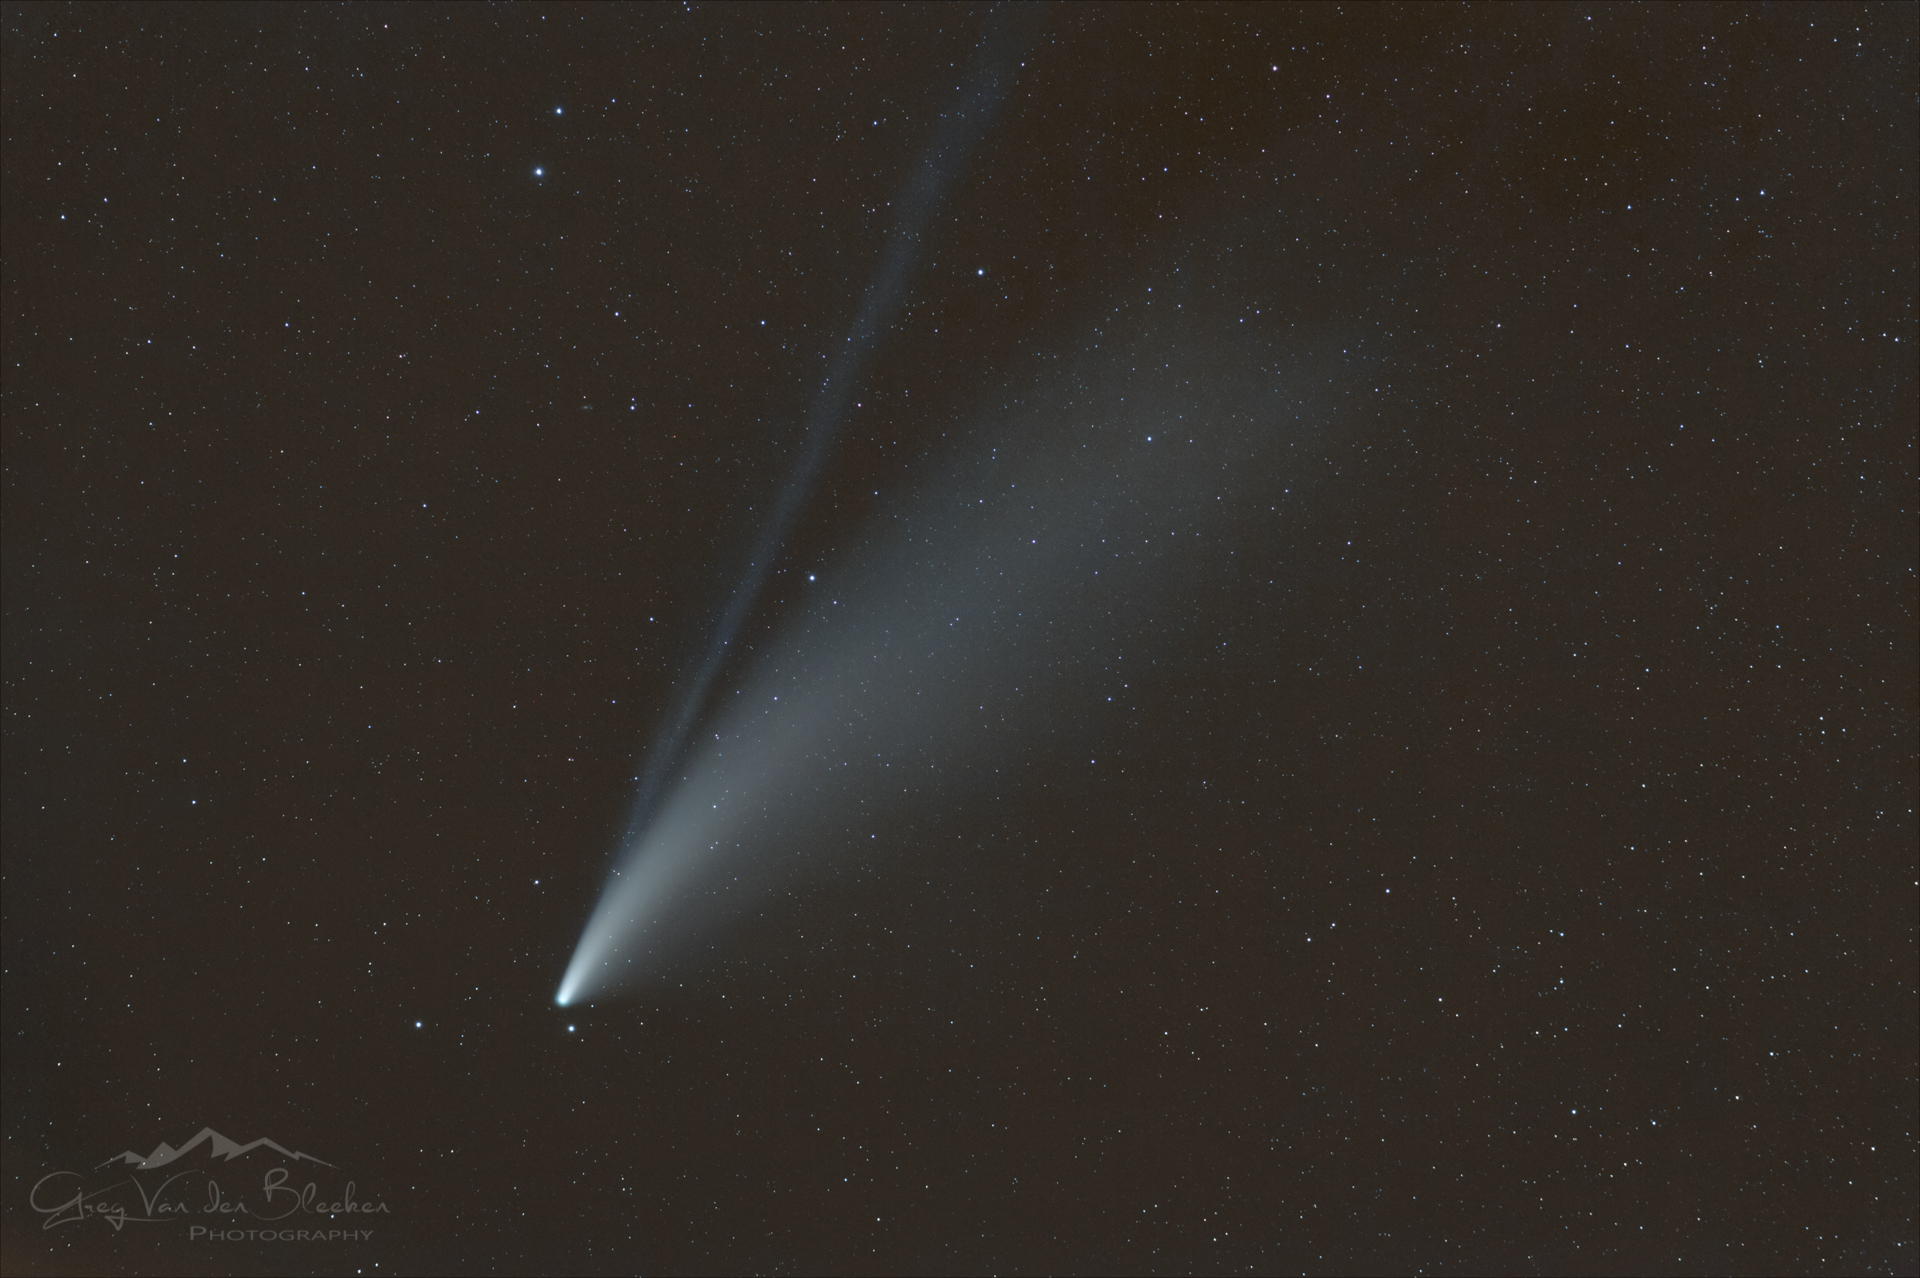 Comet C/2020 F3 (Neowise) 18/07/2020